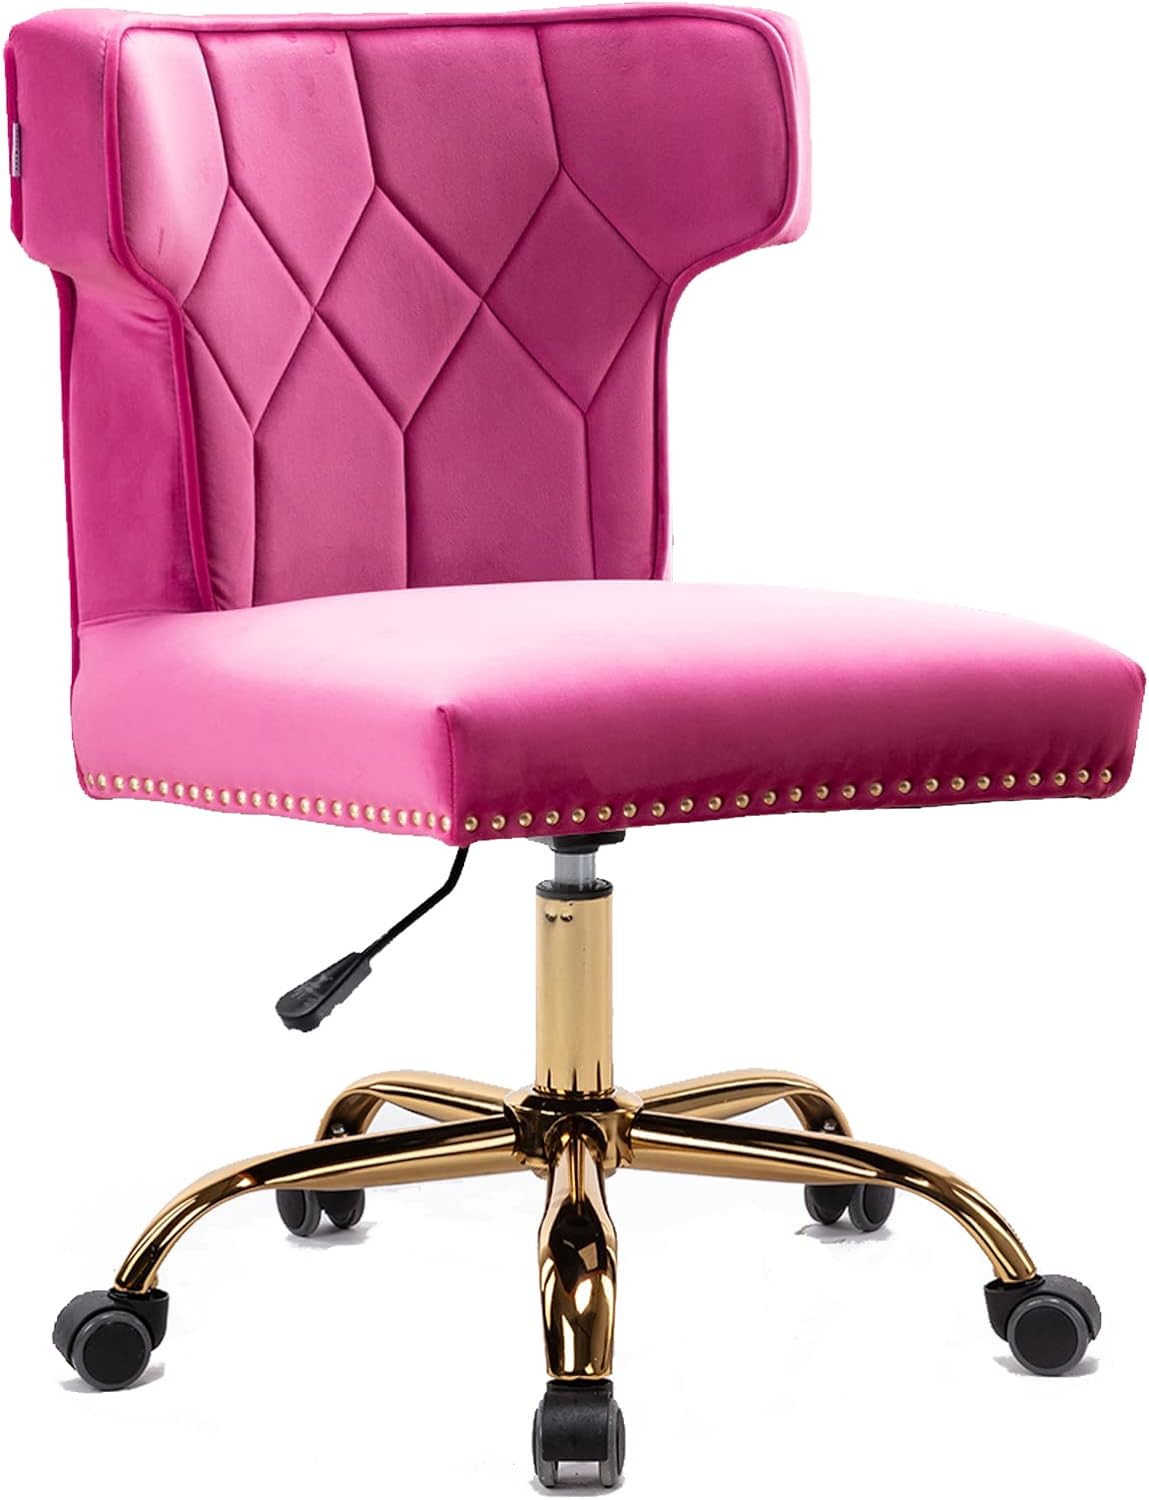 In love with this chair! The pink is a lil darker than a pastel pink, but not hot pink. Nice in between. Easy to put together. (5min). Super firm seat. Not recommending to sit in for long periods of time.